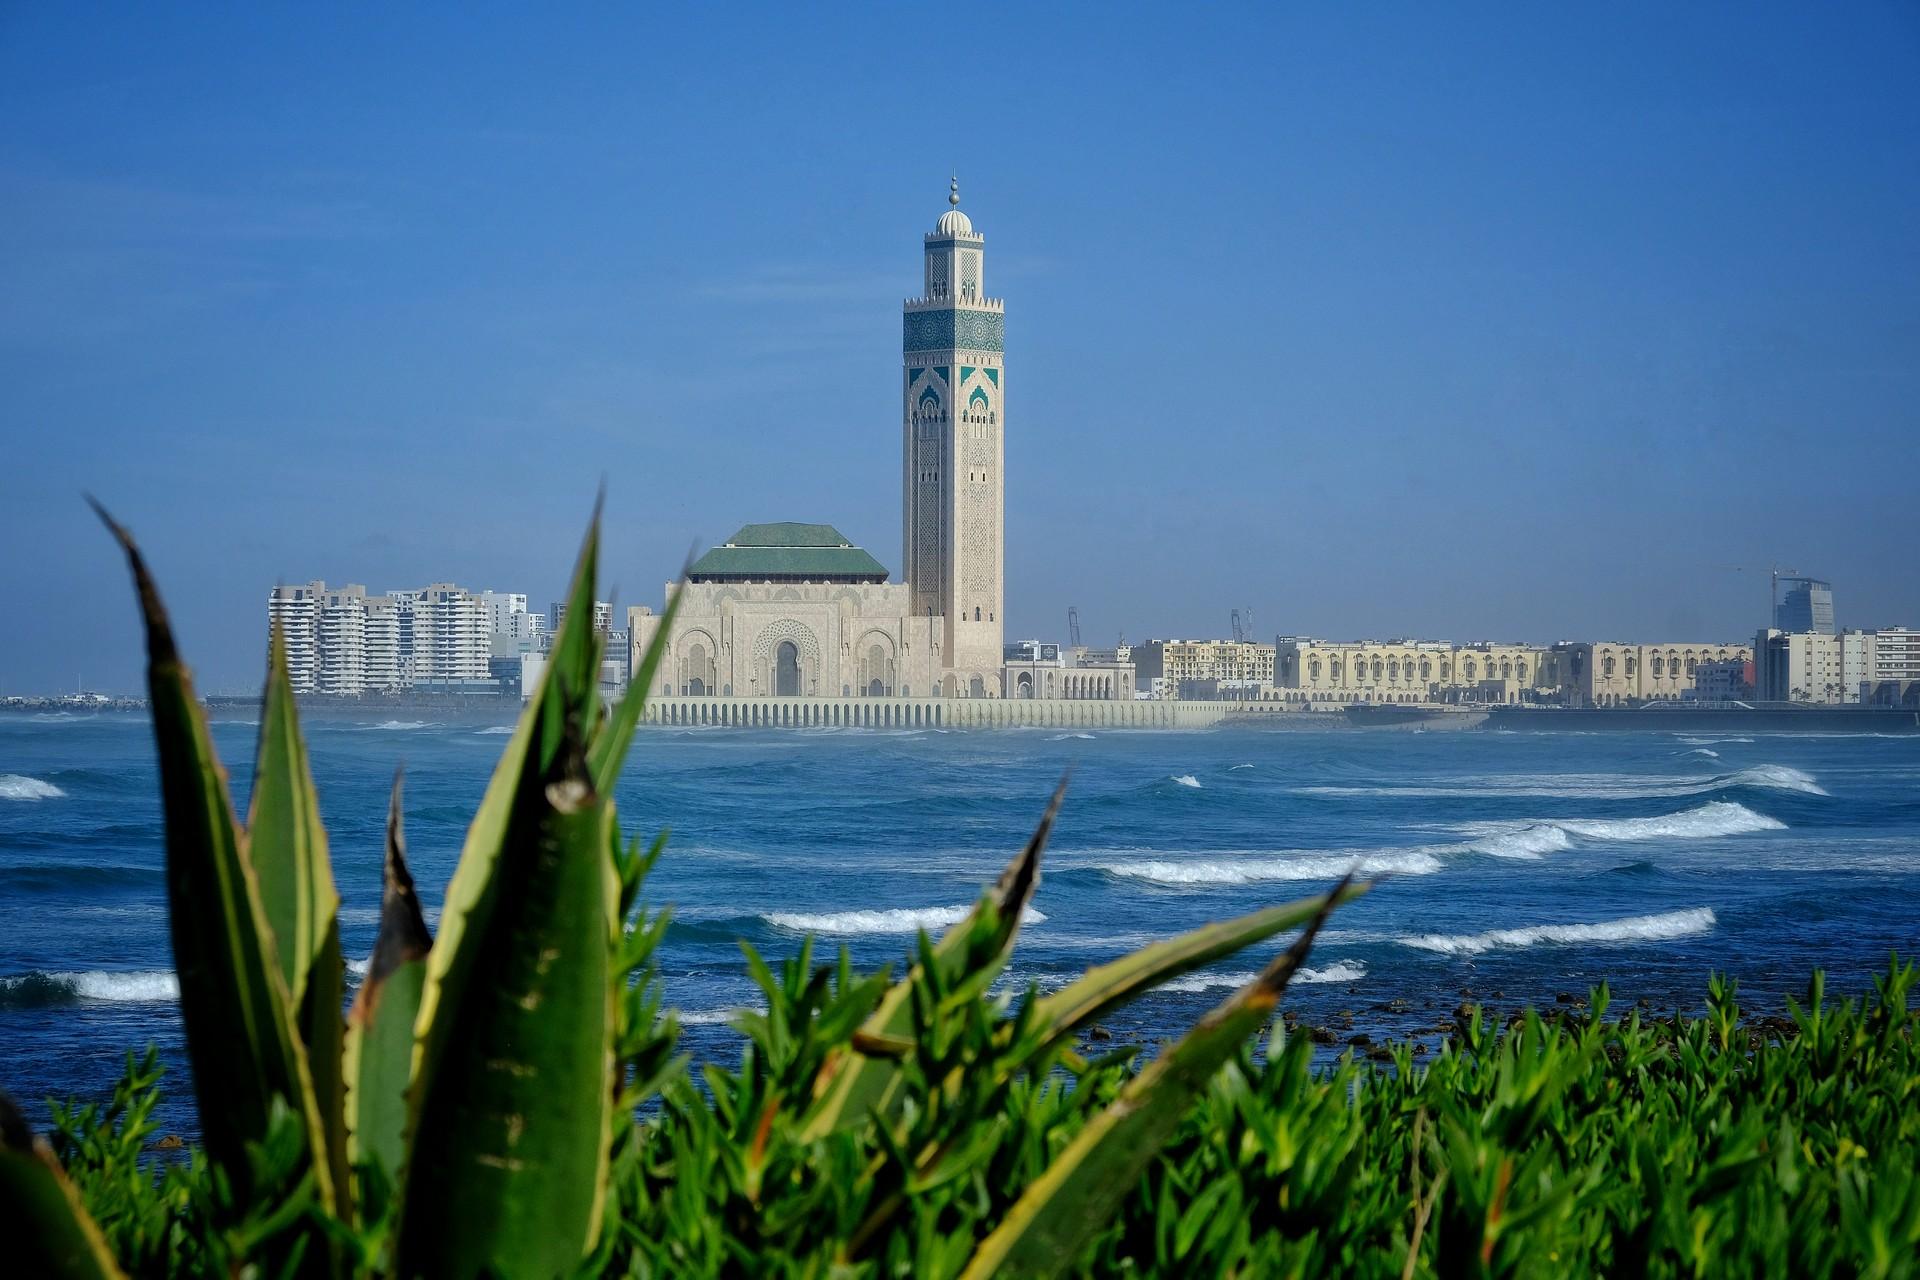 Architecture in Casablanca on a sunny day